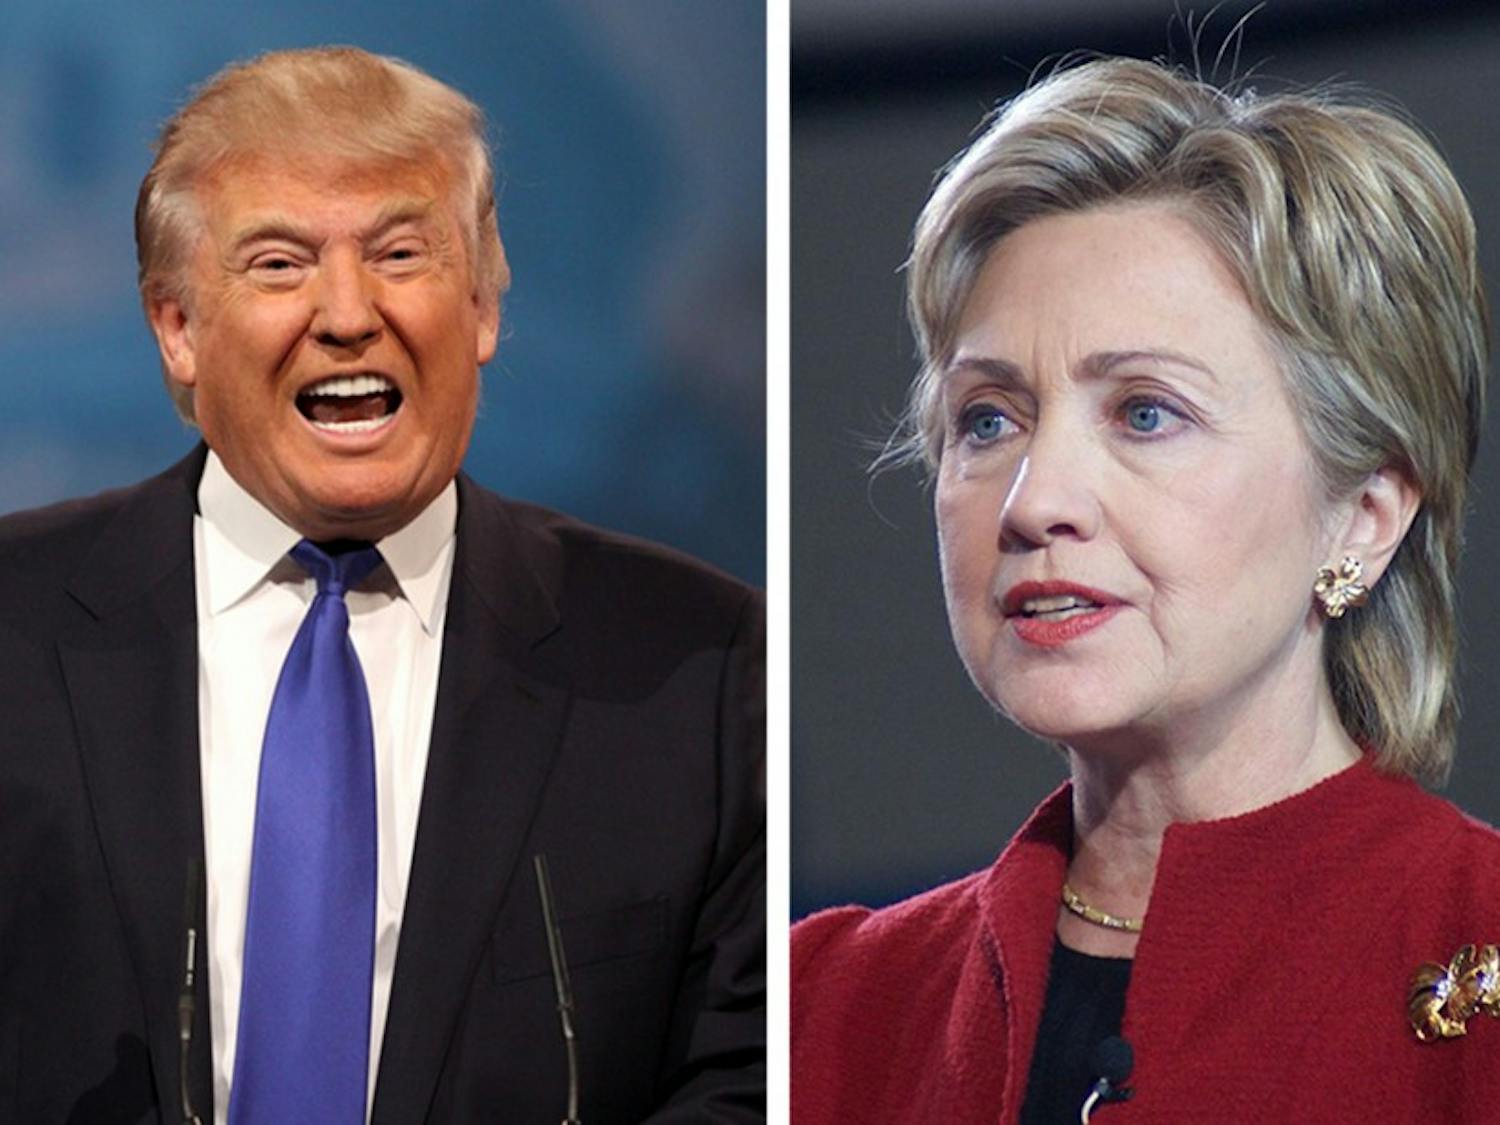 The first presidential debate will focus on domestic policy and will take place at 9 p.m. on NBC.